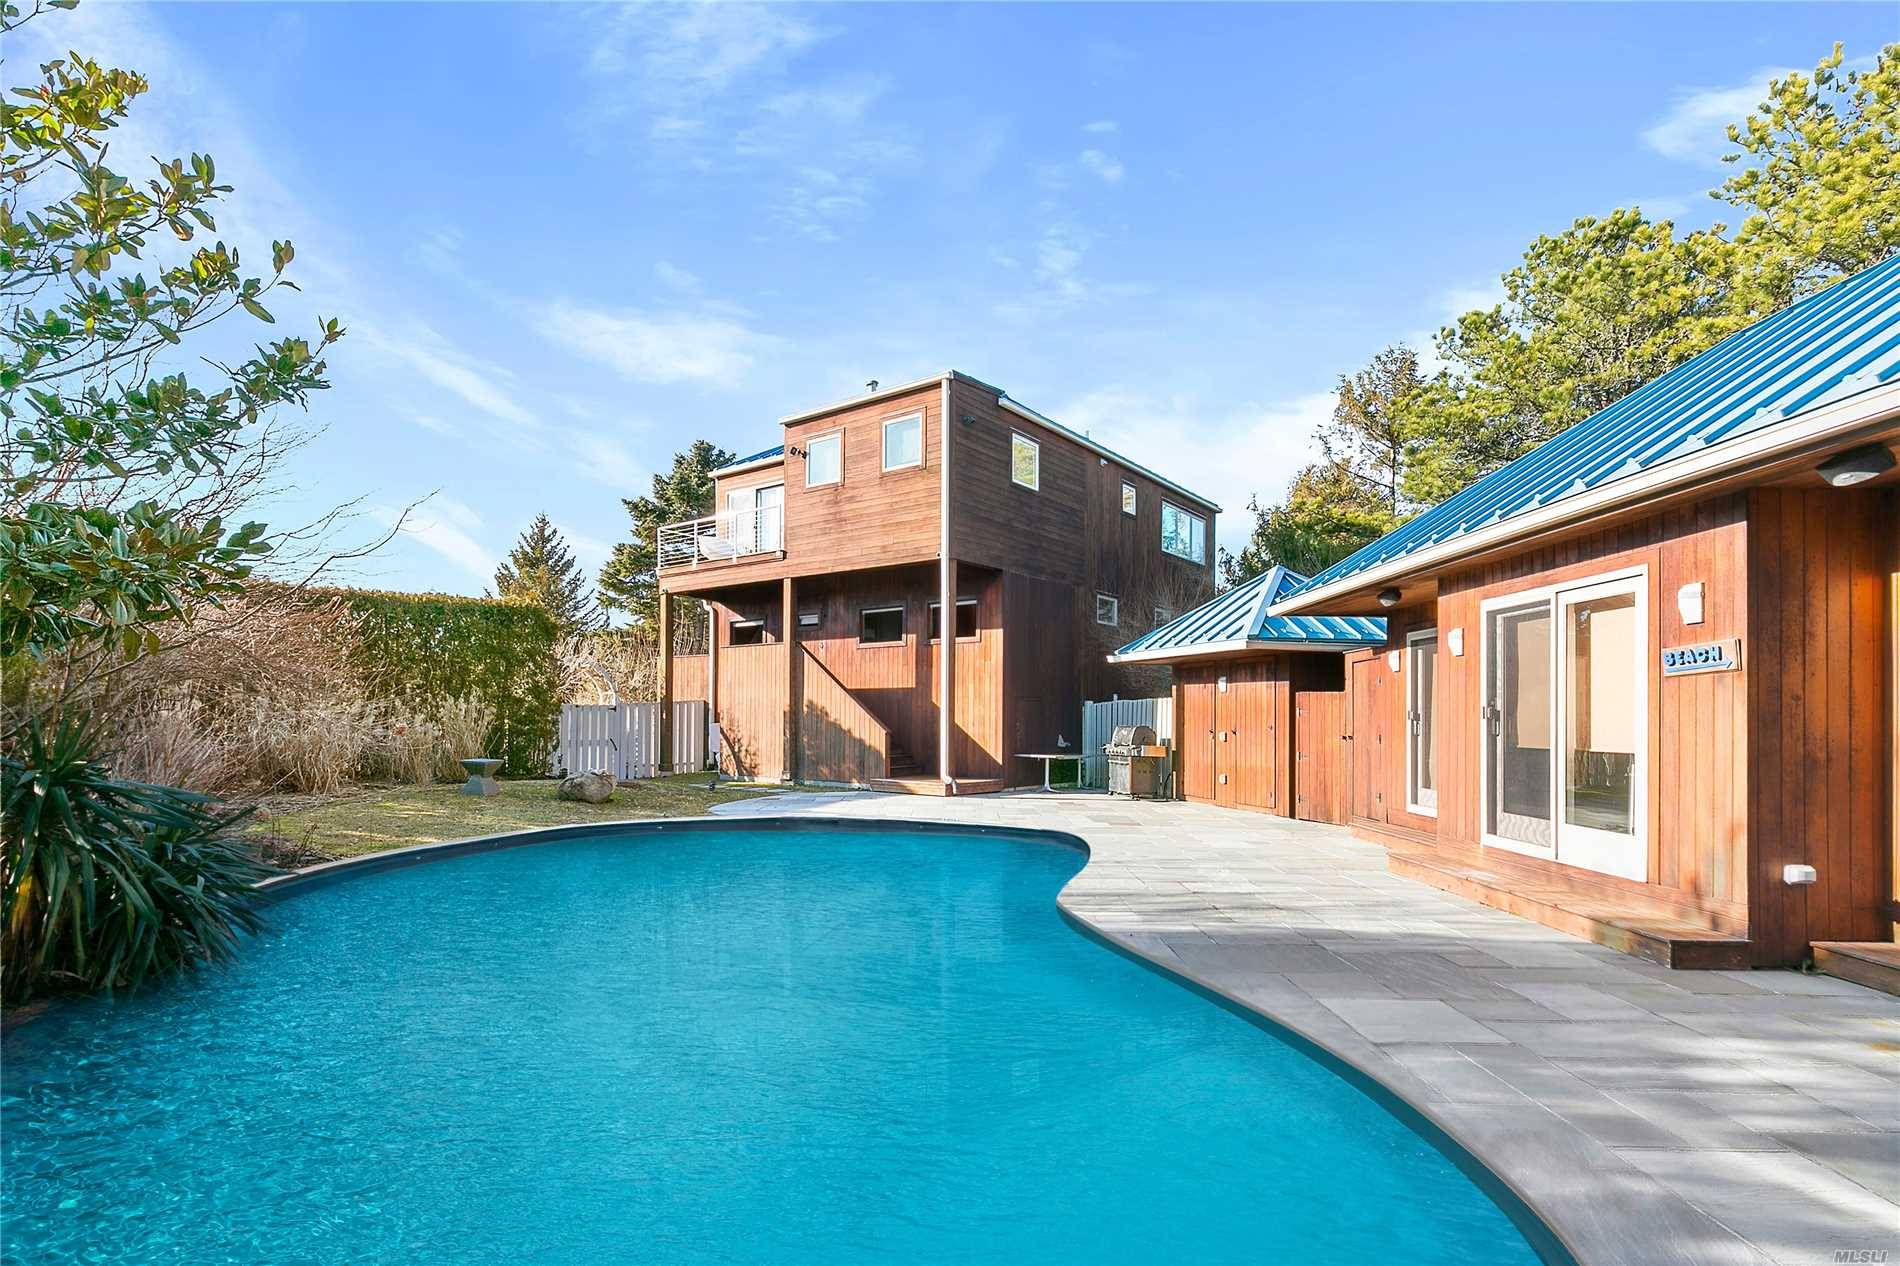 You Can Have It All In This Immaculate Modern Compound In The Amagansett Dunes With A Heated Pool, Just One Block From The Ocean.